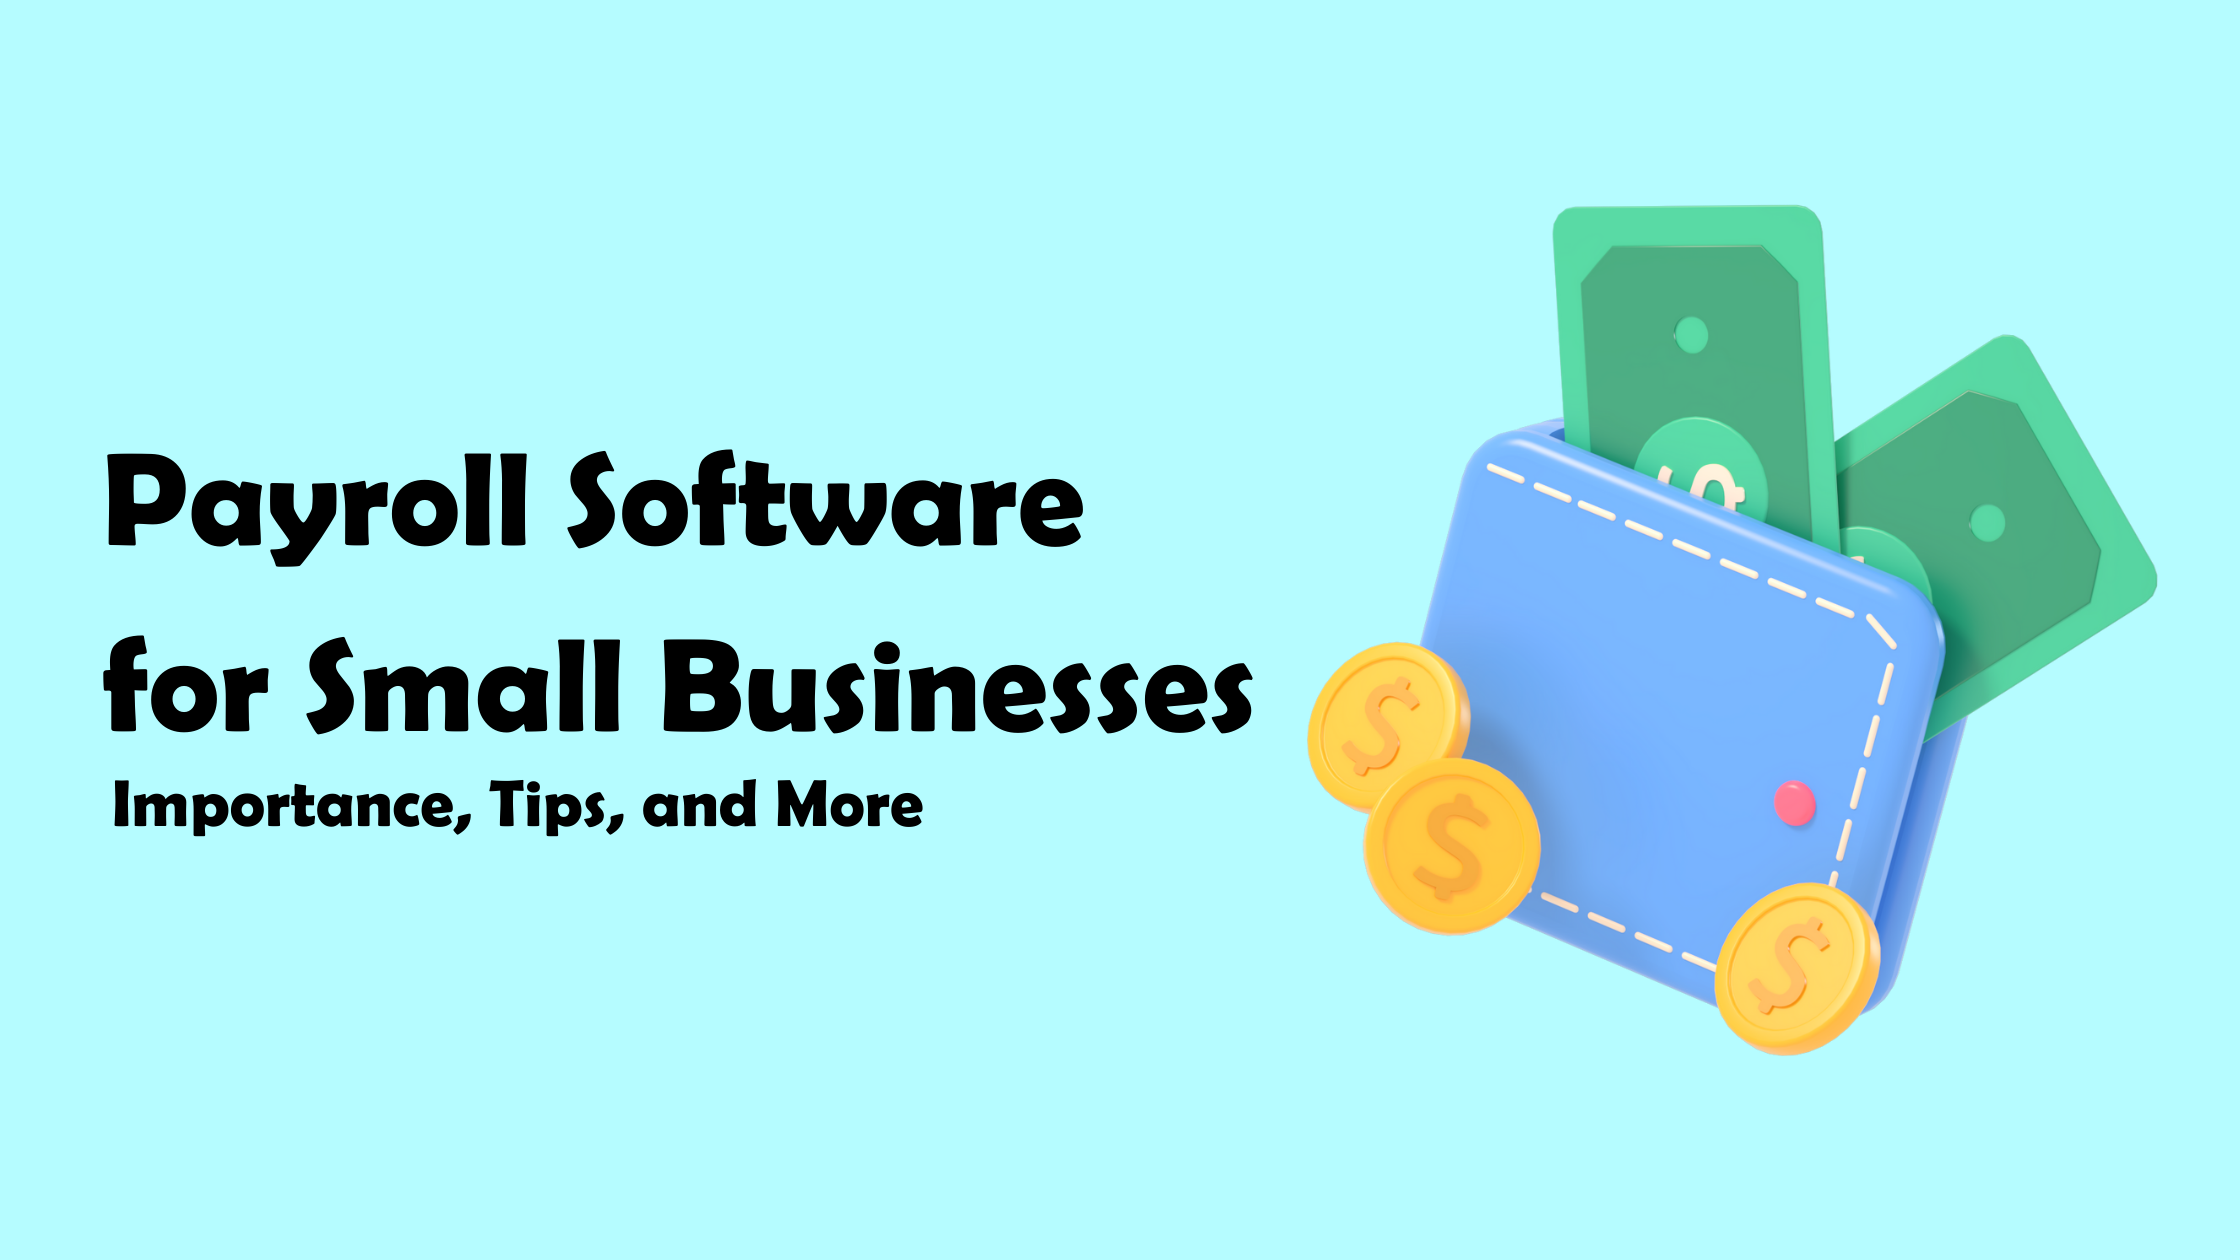 Payroll Software for Small Businesses